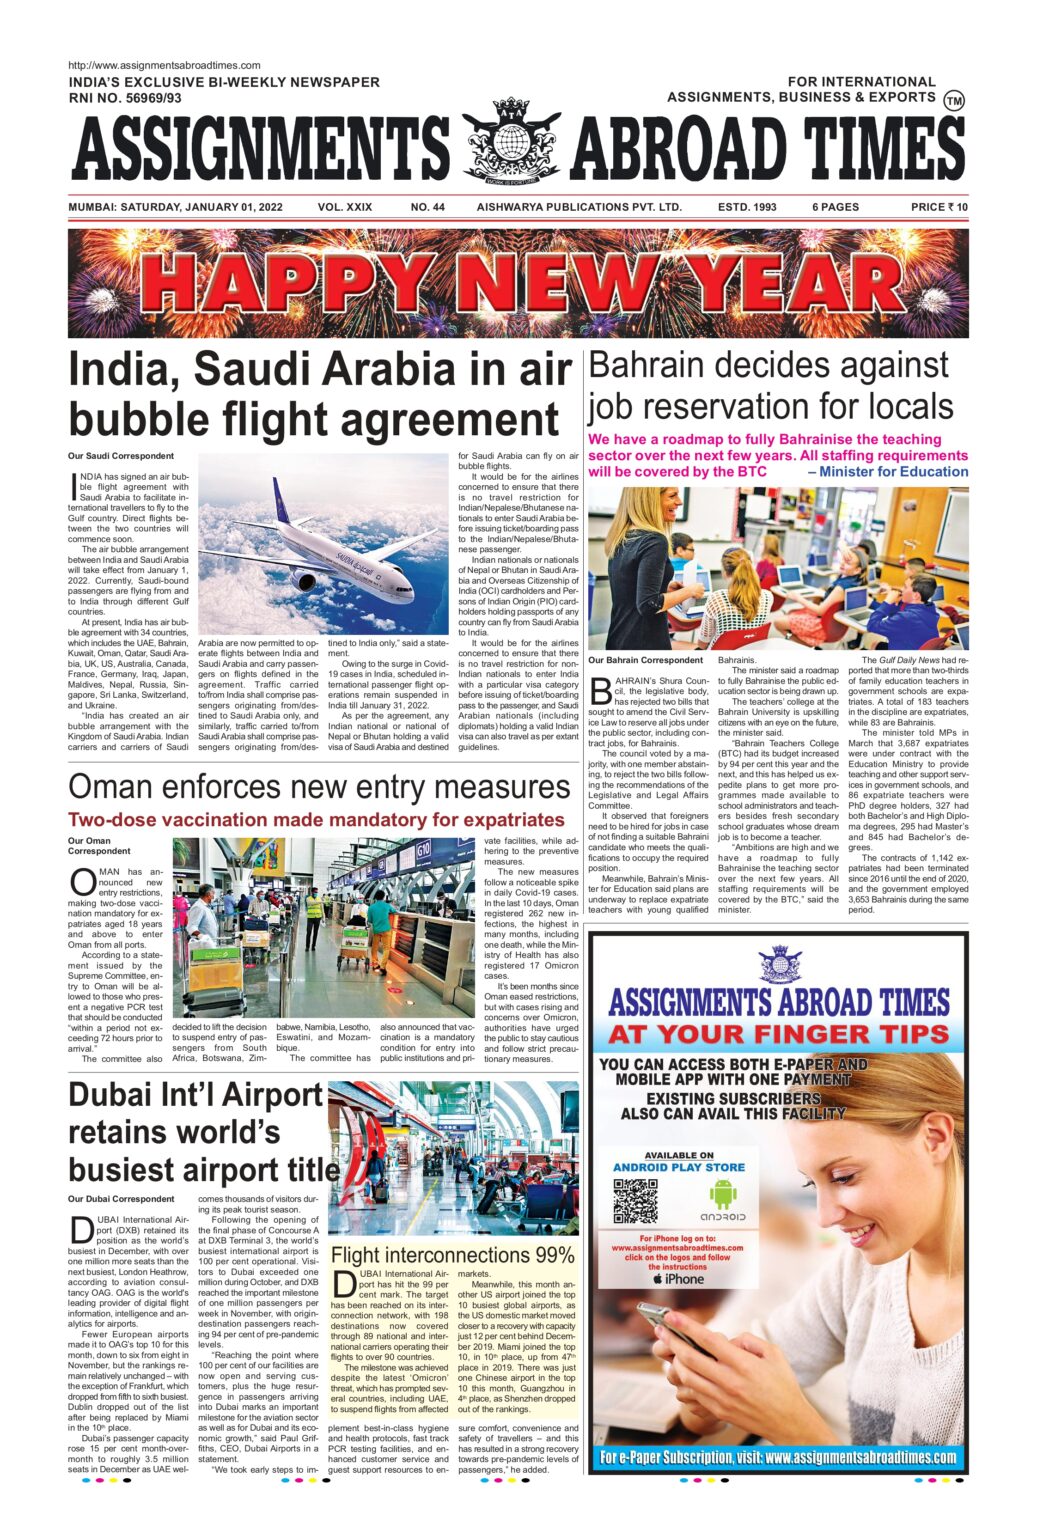 today assignment abroad times pdf